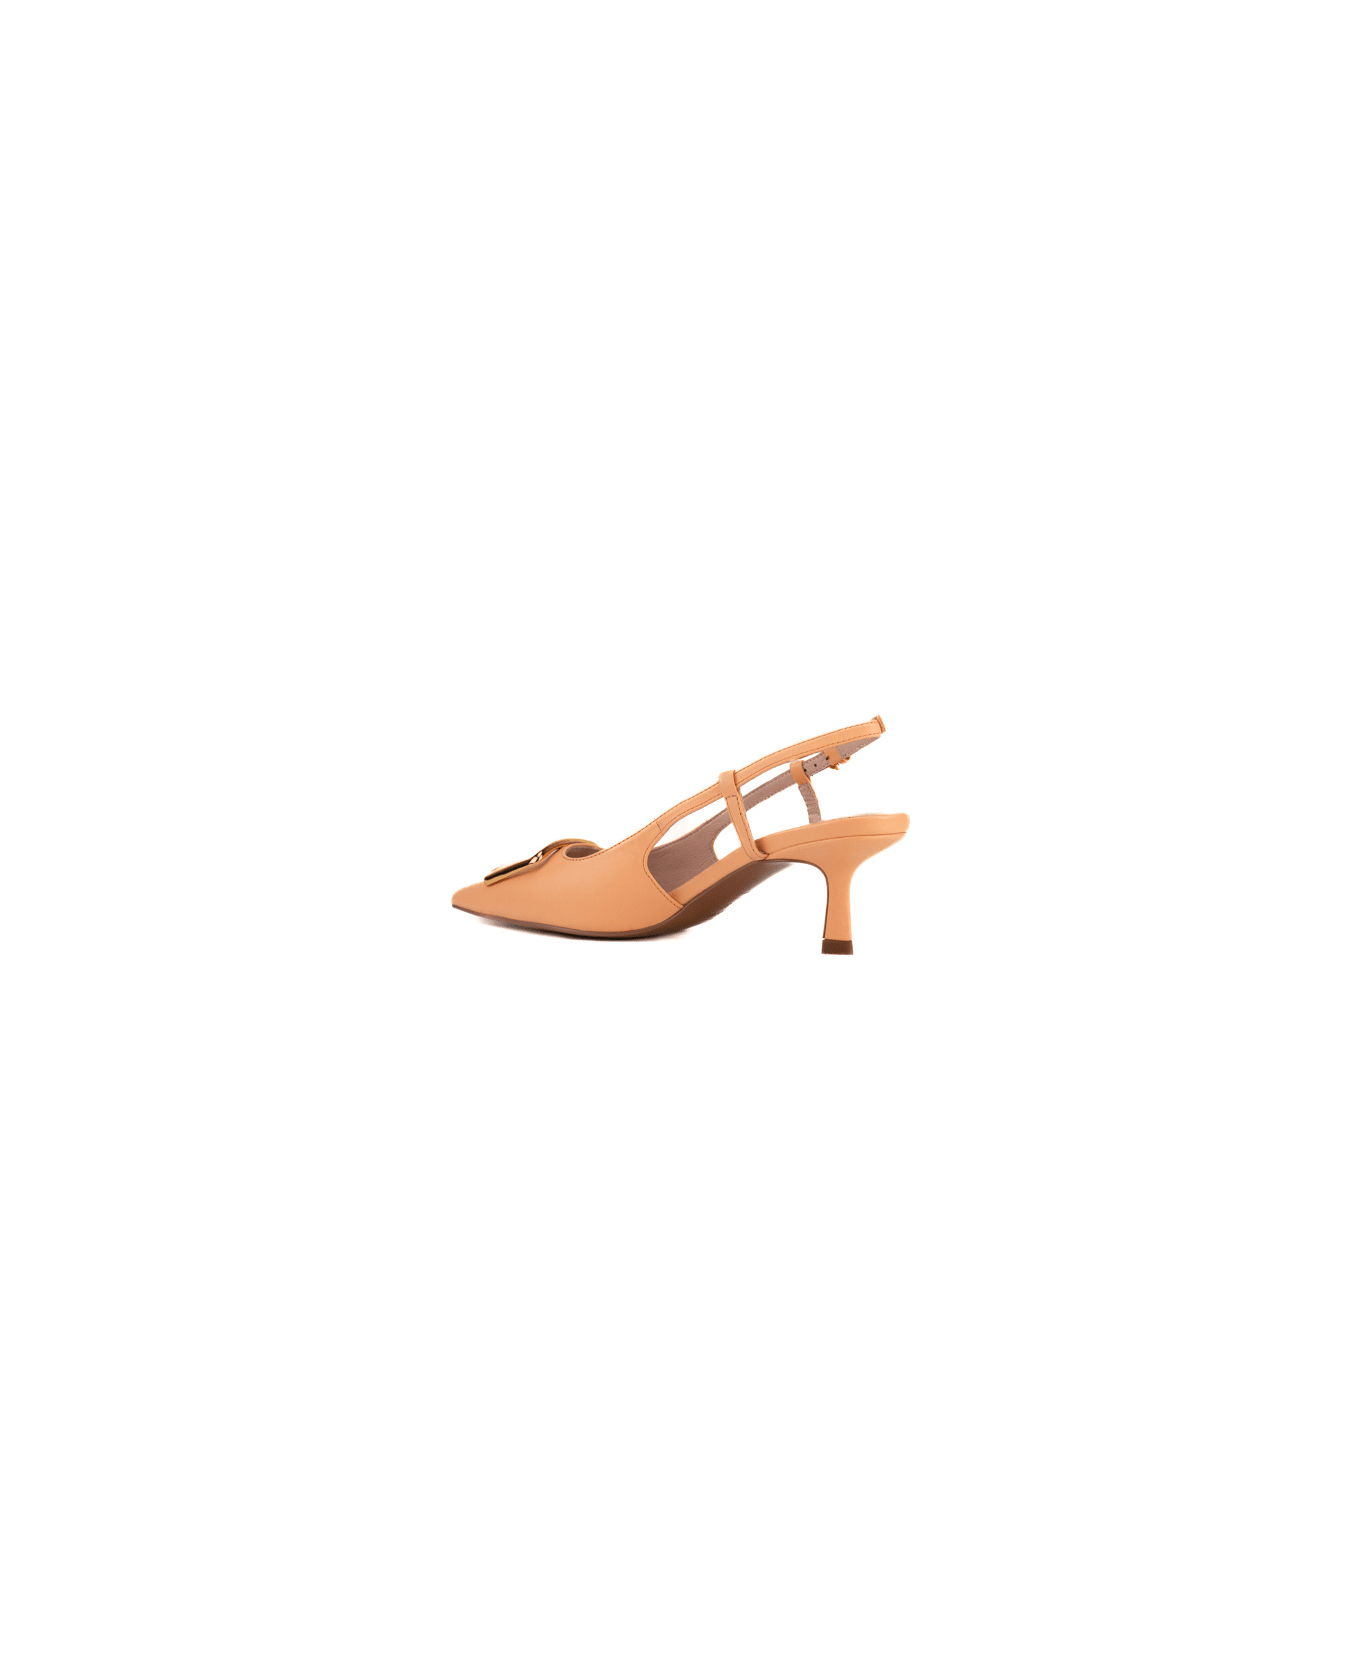 Coccinelle Leather Pumps With Stiletto Heel - Sunrise ハイヒール